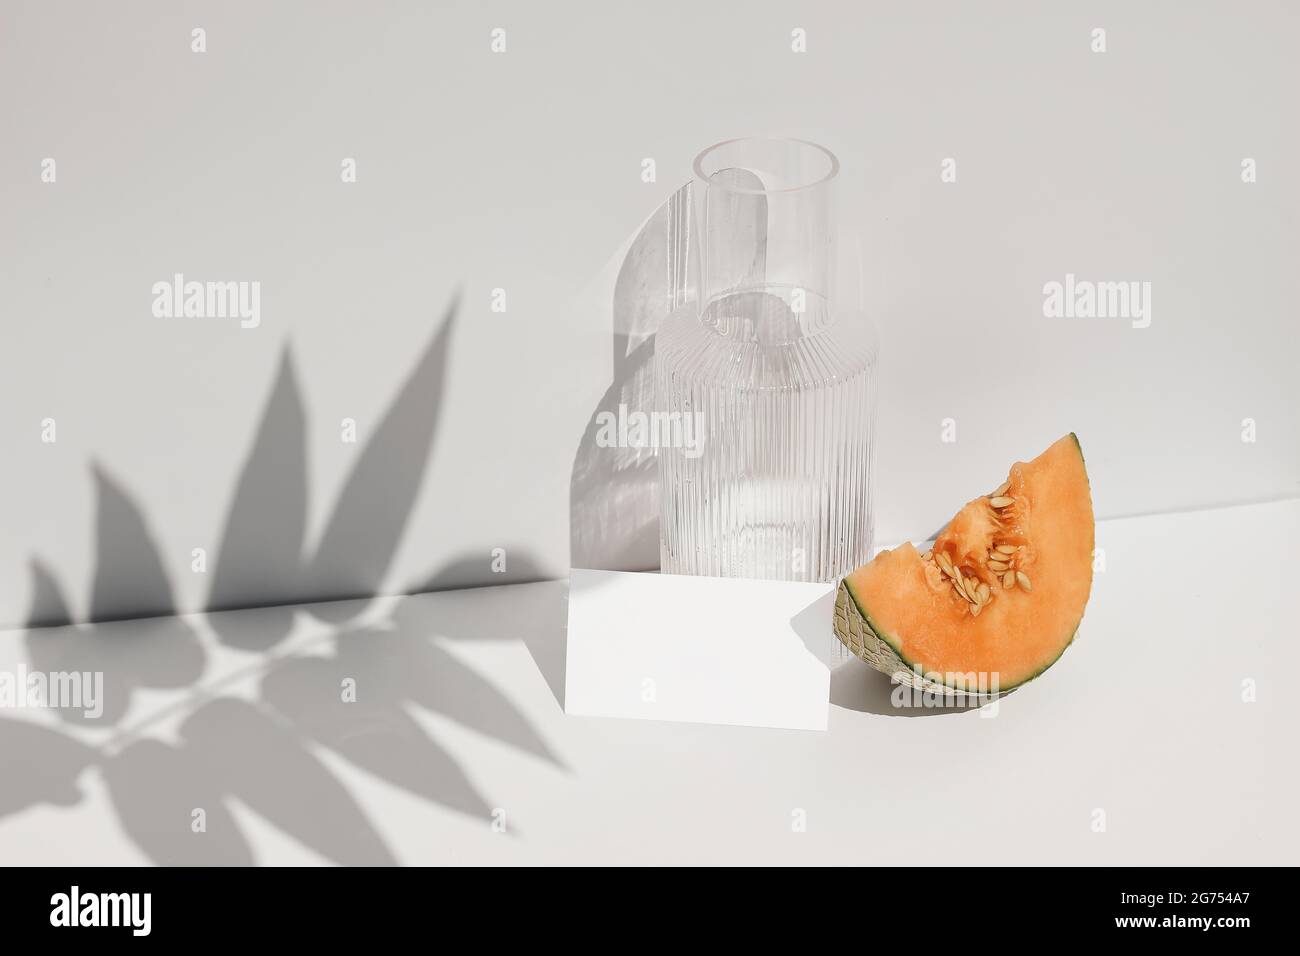 Summer food still life composition. Cantaloupe melon fruit on table. White wall with palm leaf shadow overlay. Blank paper card, invitation mockup Stock Photo